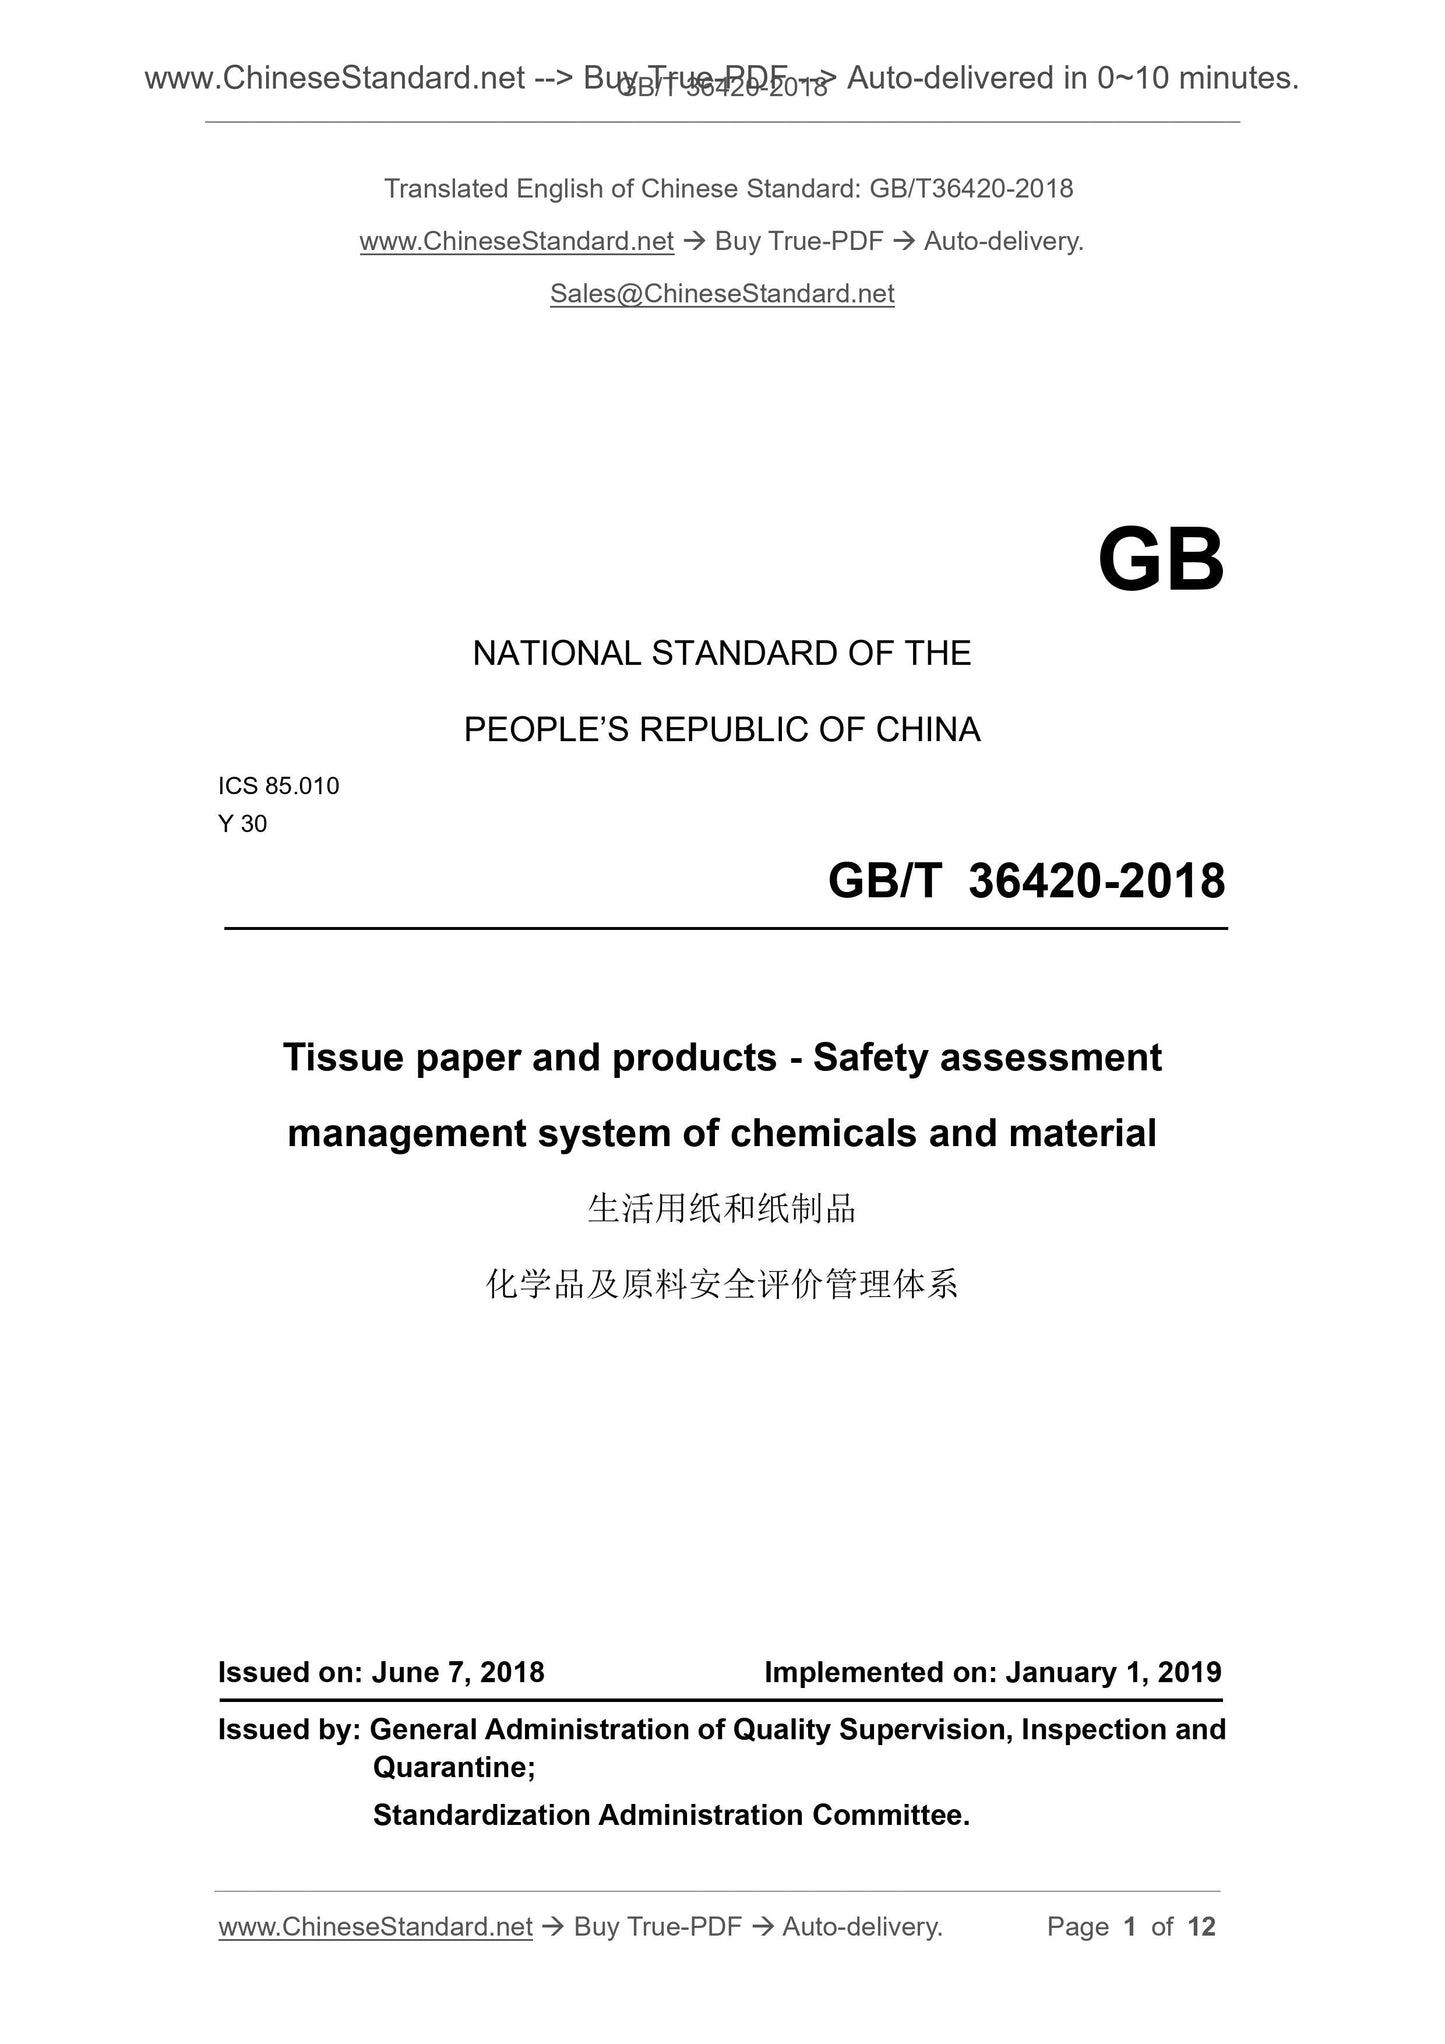 GB/T 36420-2018 Page 1